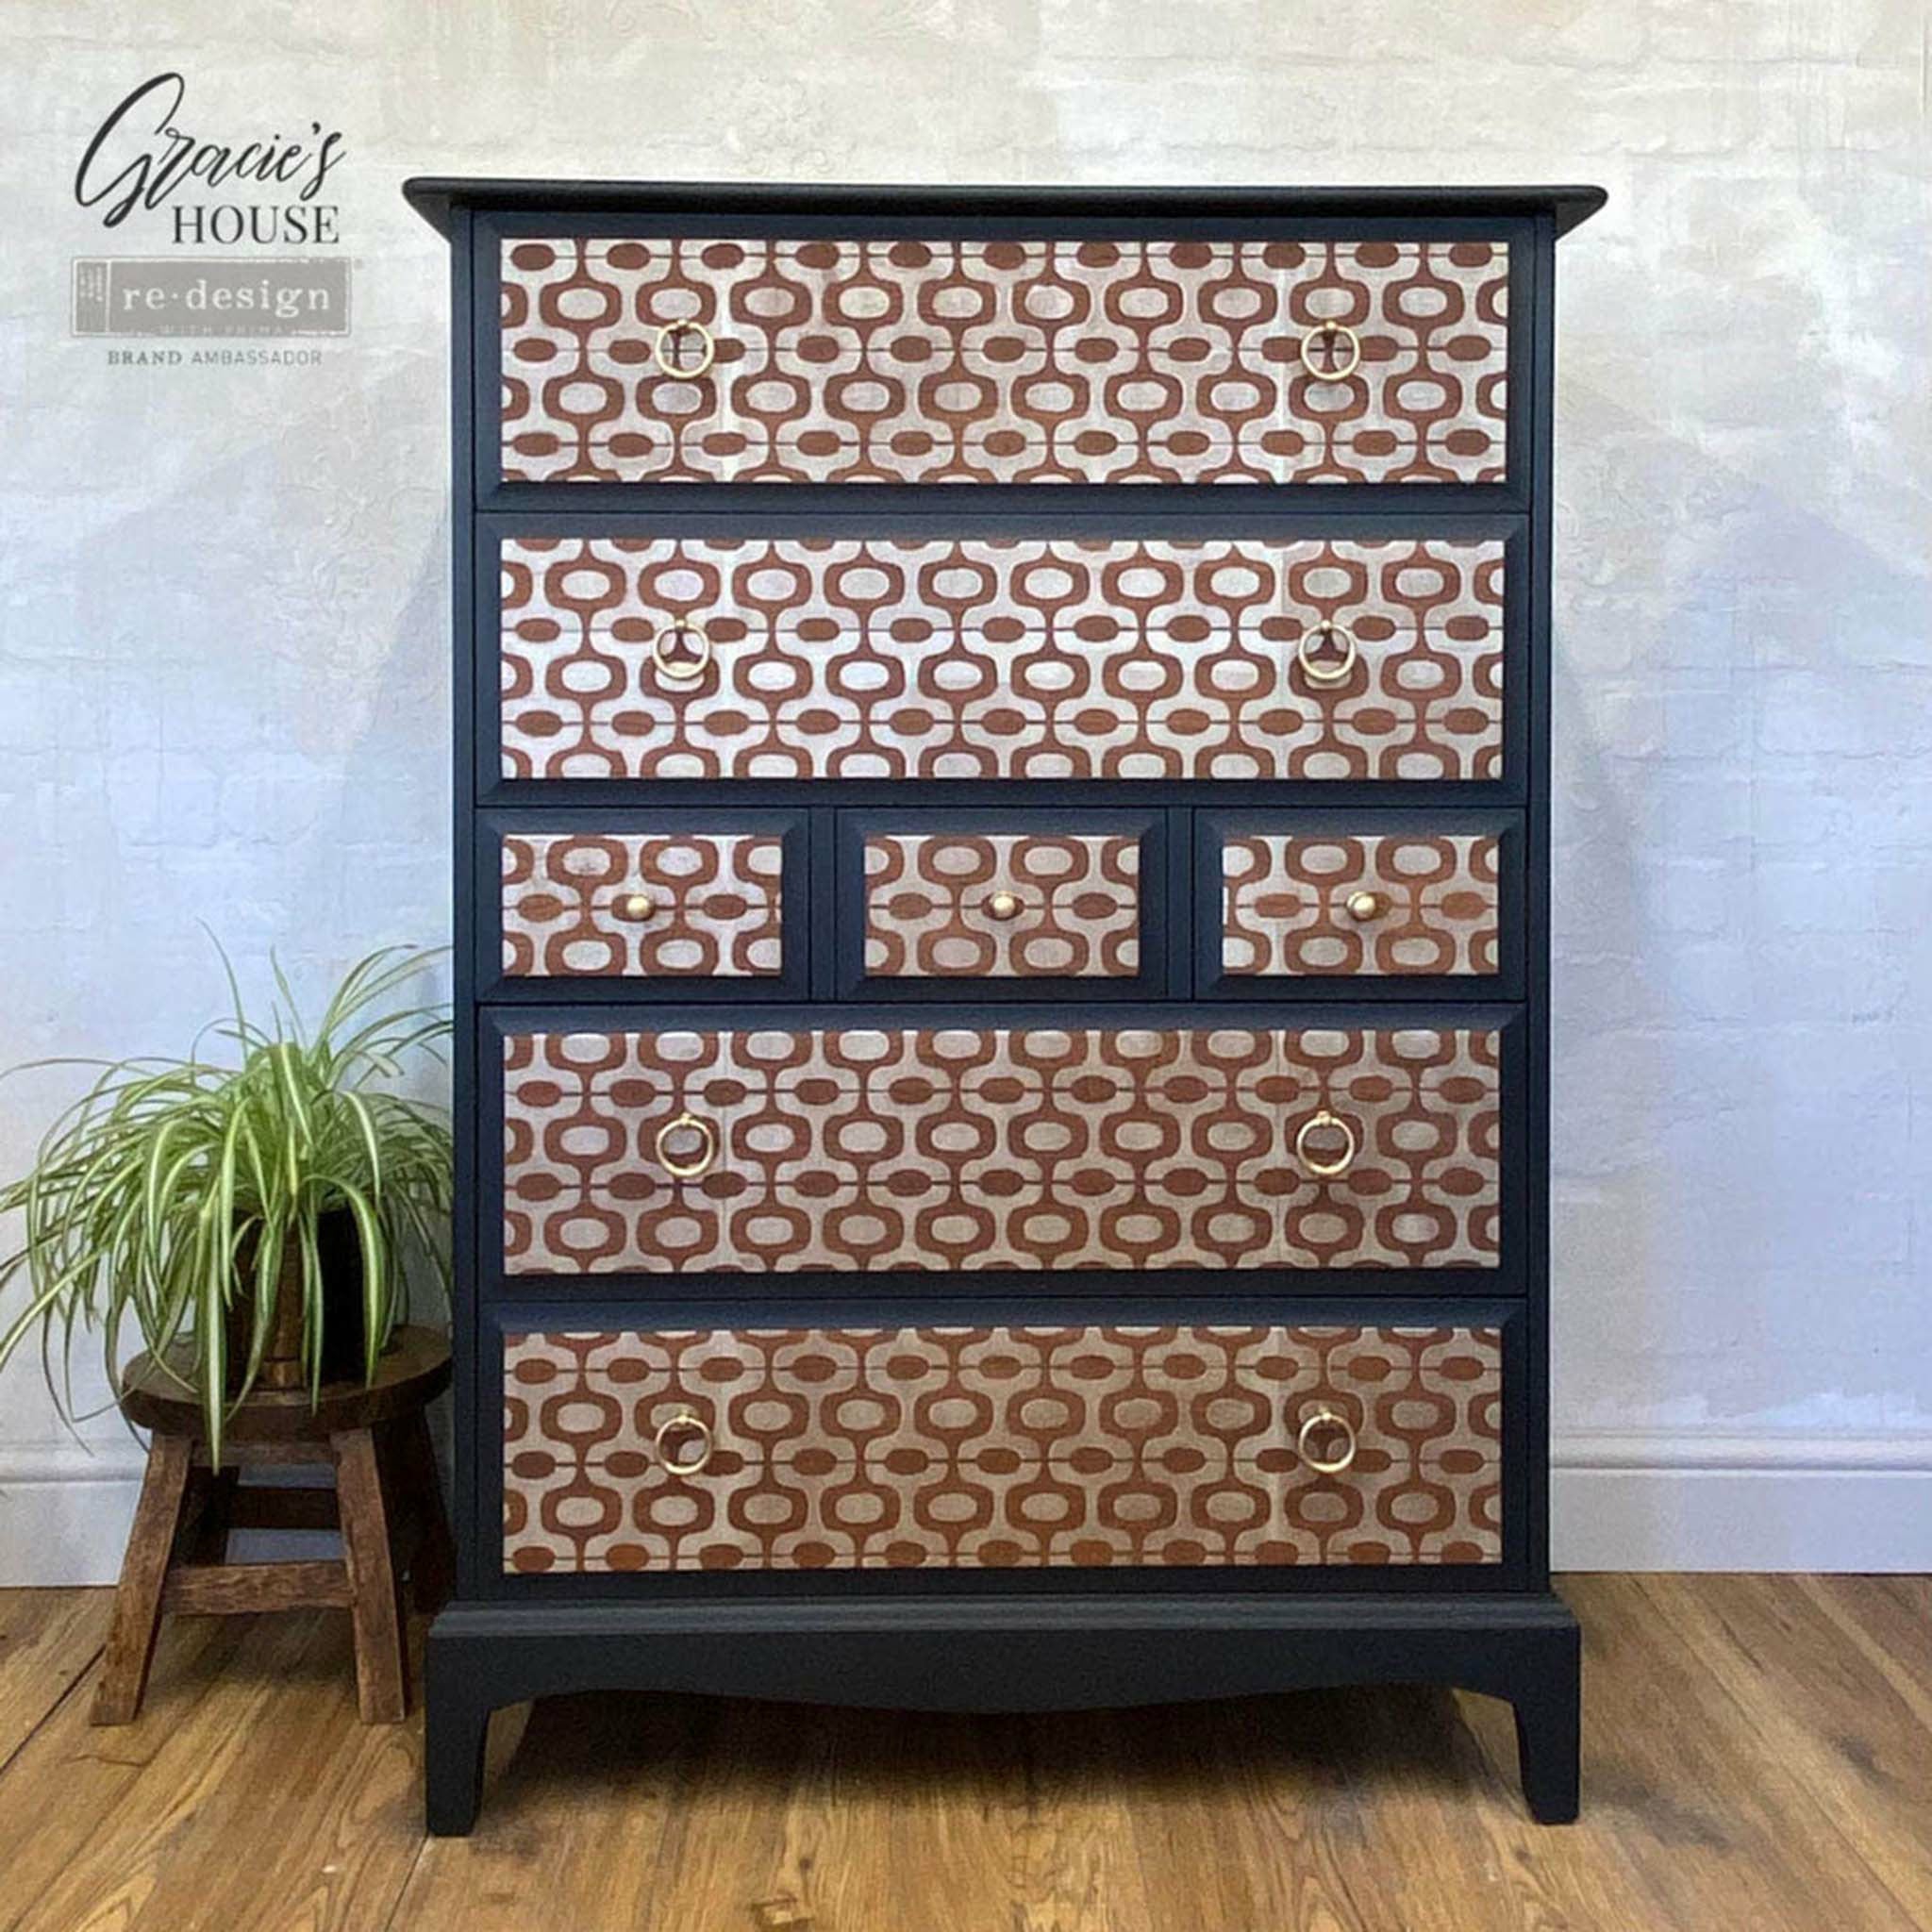 Black dresser with the Midcentury Vibes stencil on the drawers. A black Gracies house redesign brand ambassador logo on the top left.